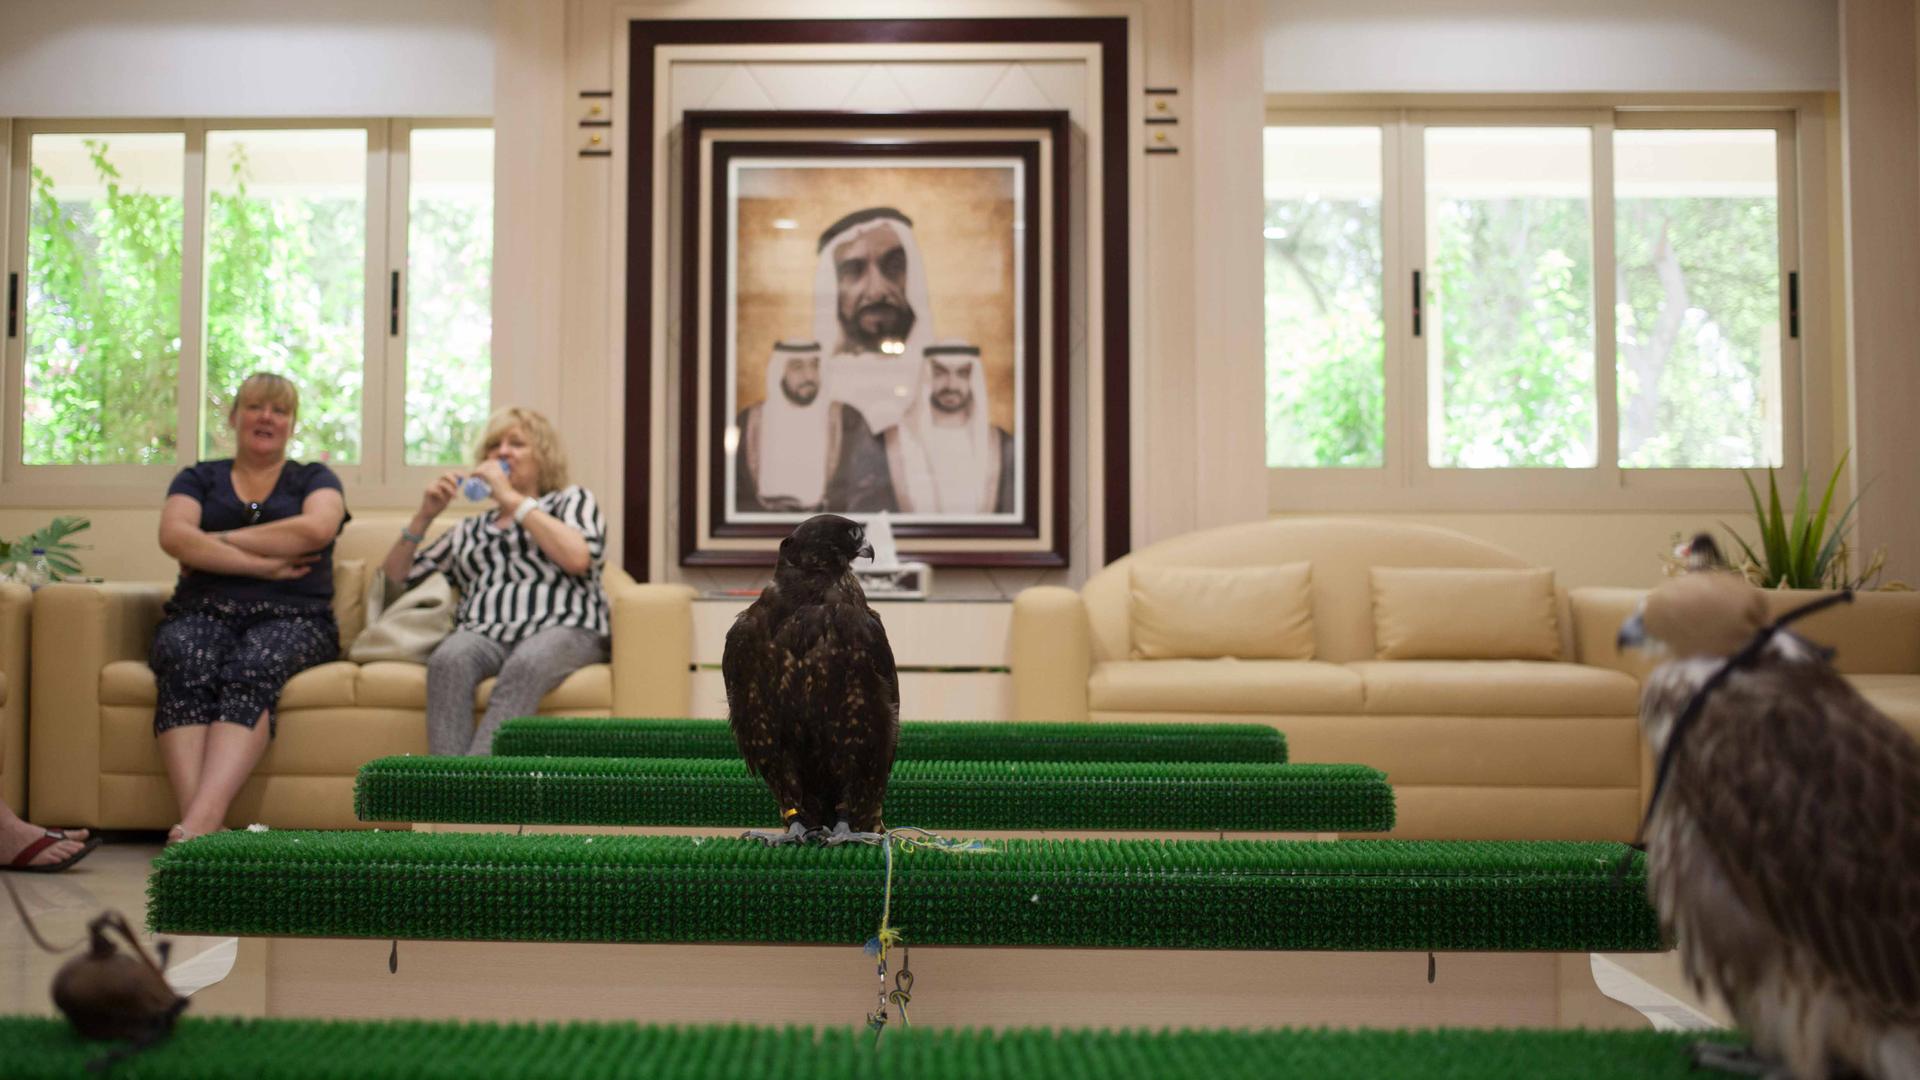 Tourists wait for a tour of the Abu Dhabi Falcon Hospital. A portrait of Sheikh Zayed (center) and his sons can be seen on the wall.